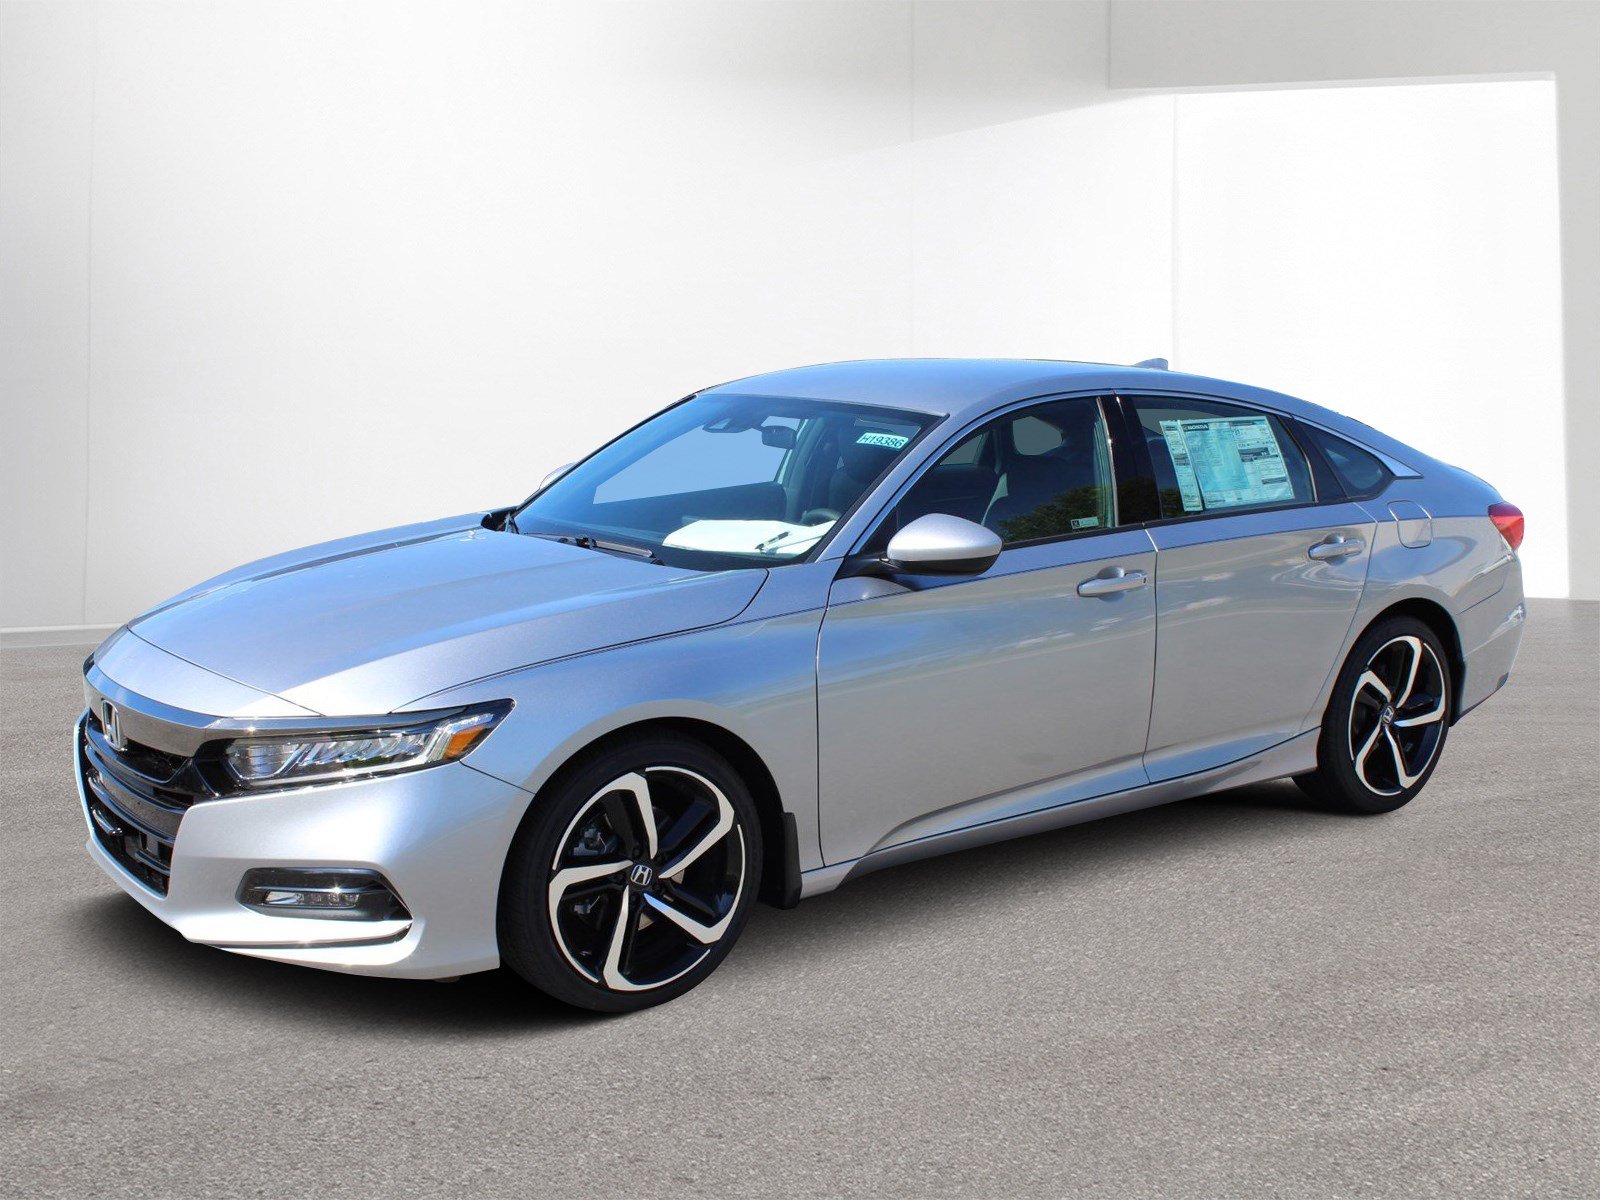 New 2019 Honda Accord Sport 1.5T 4dr Car in Milledgeville #H19386